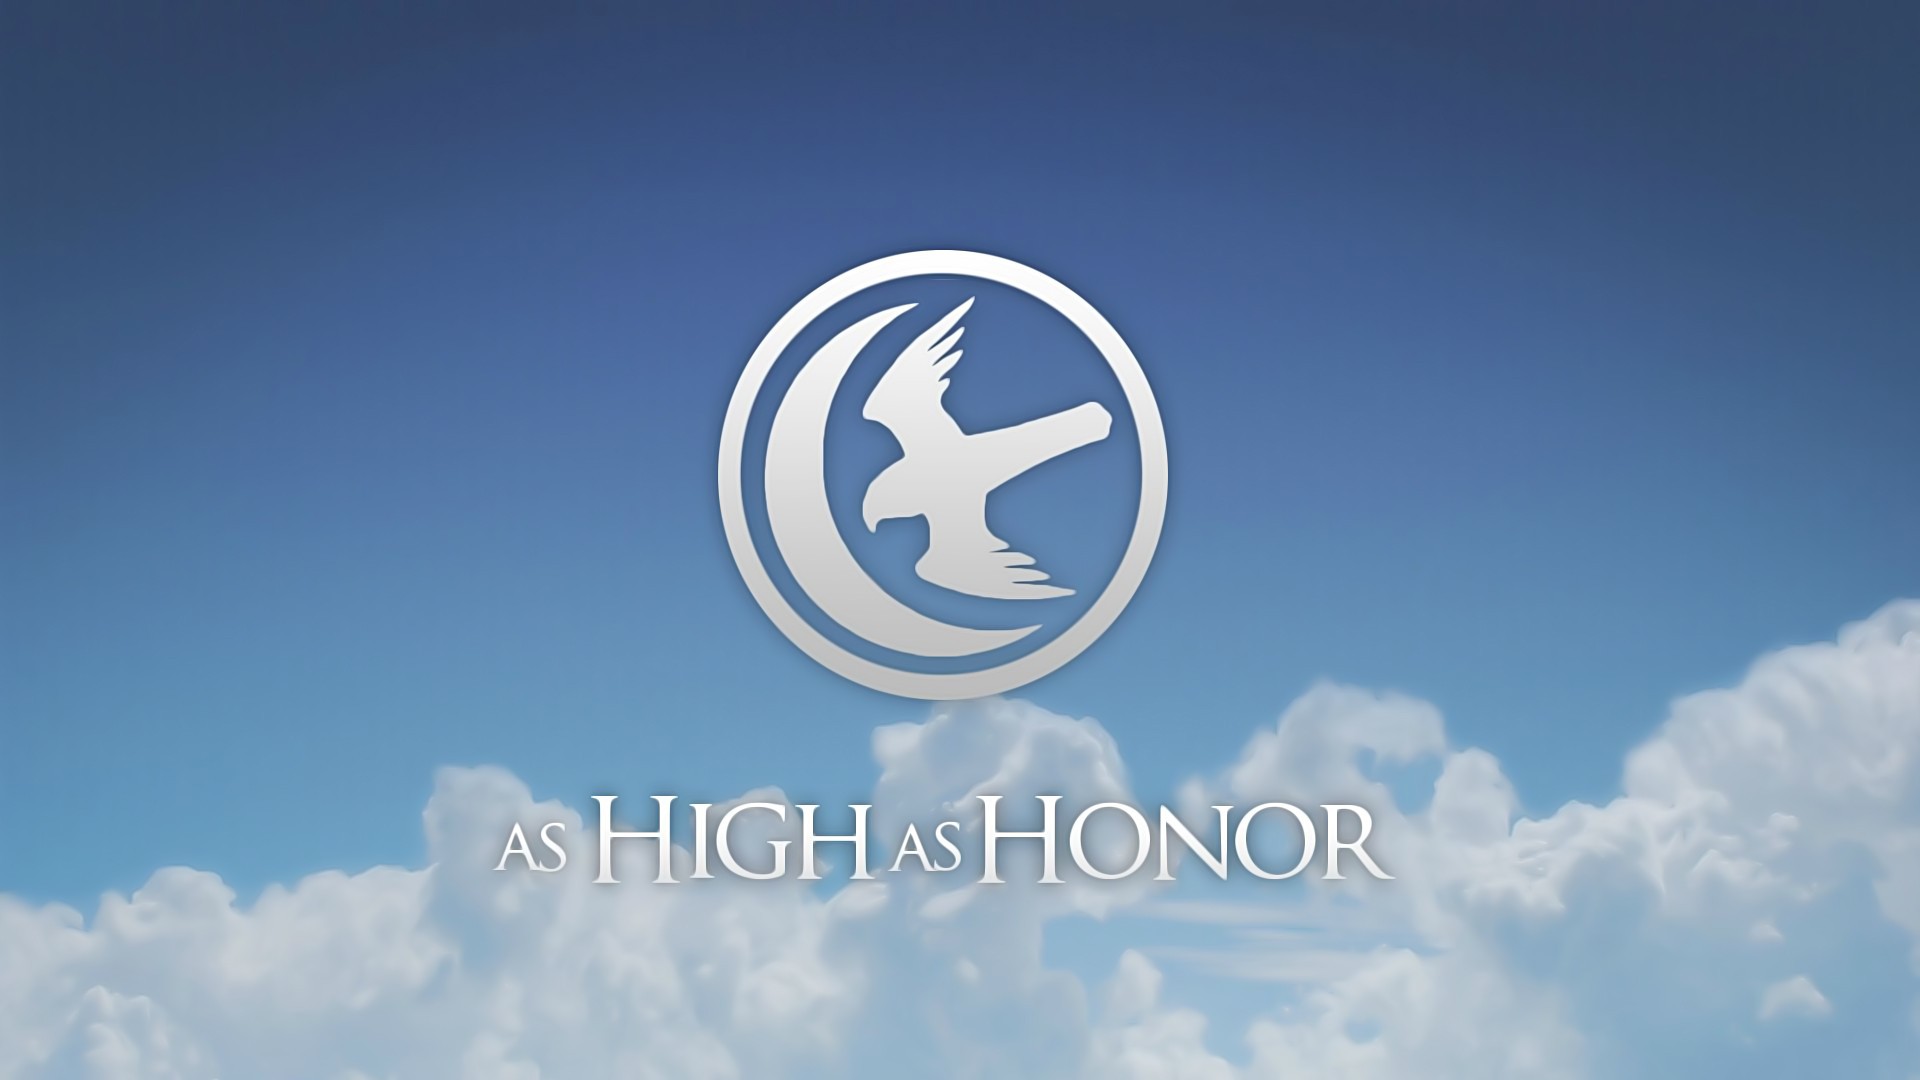 Game Of Thrones, House Arryn, Sigils, Clouds Wallpaper